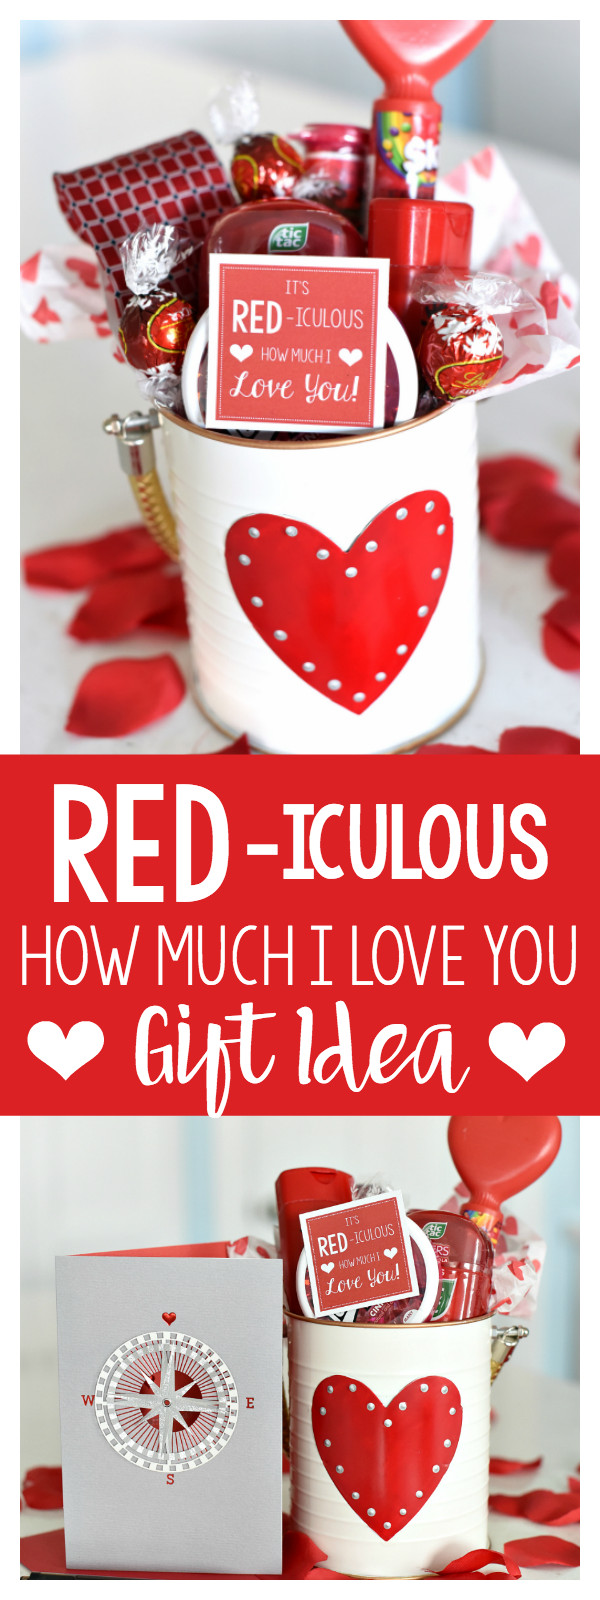 Valentines Ideas Gift
 Cute Valentine s Day Gift Idea RED iculous Basket